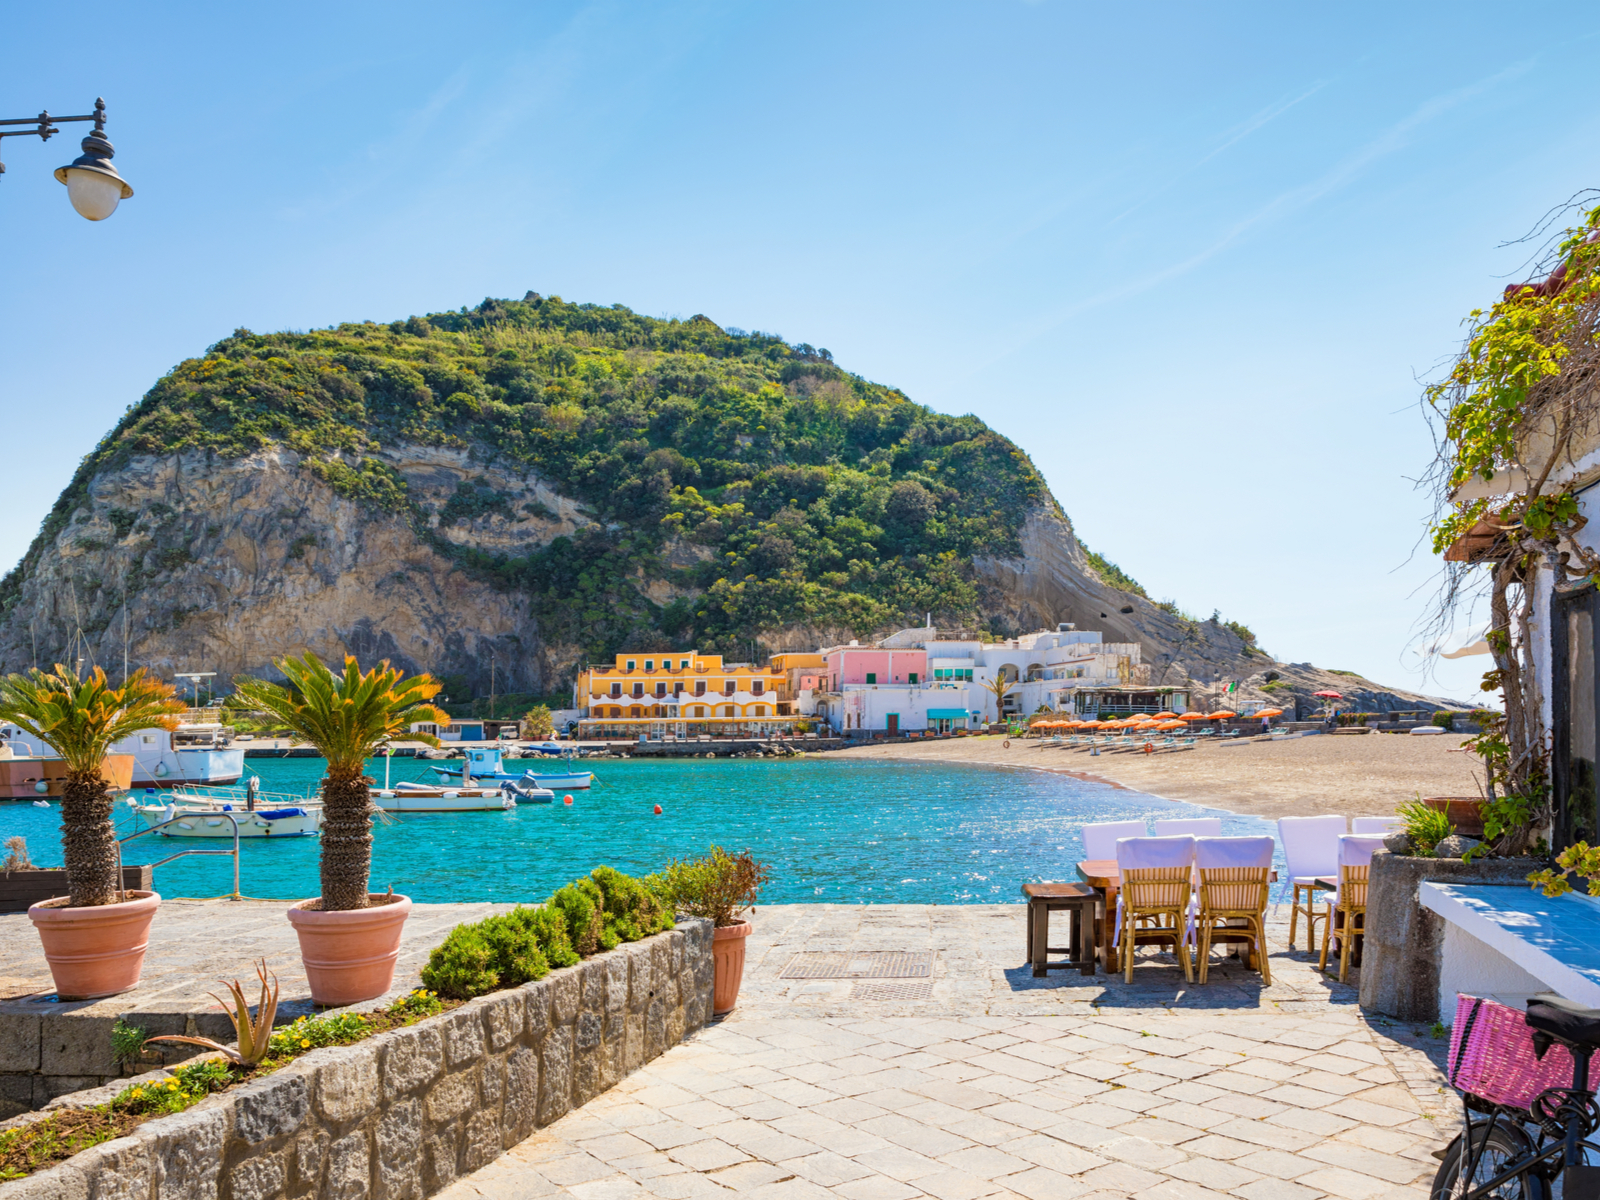 Ischia Island, one of the best places to visit in Italy, pictured from outside a cafe